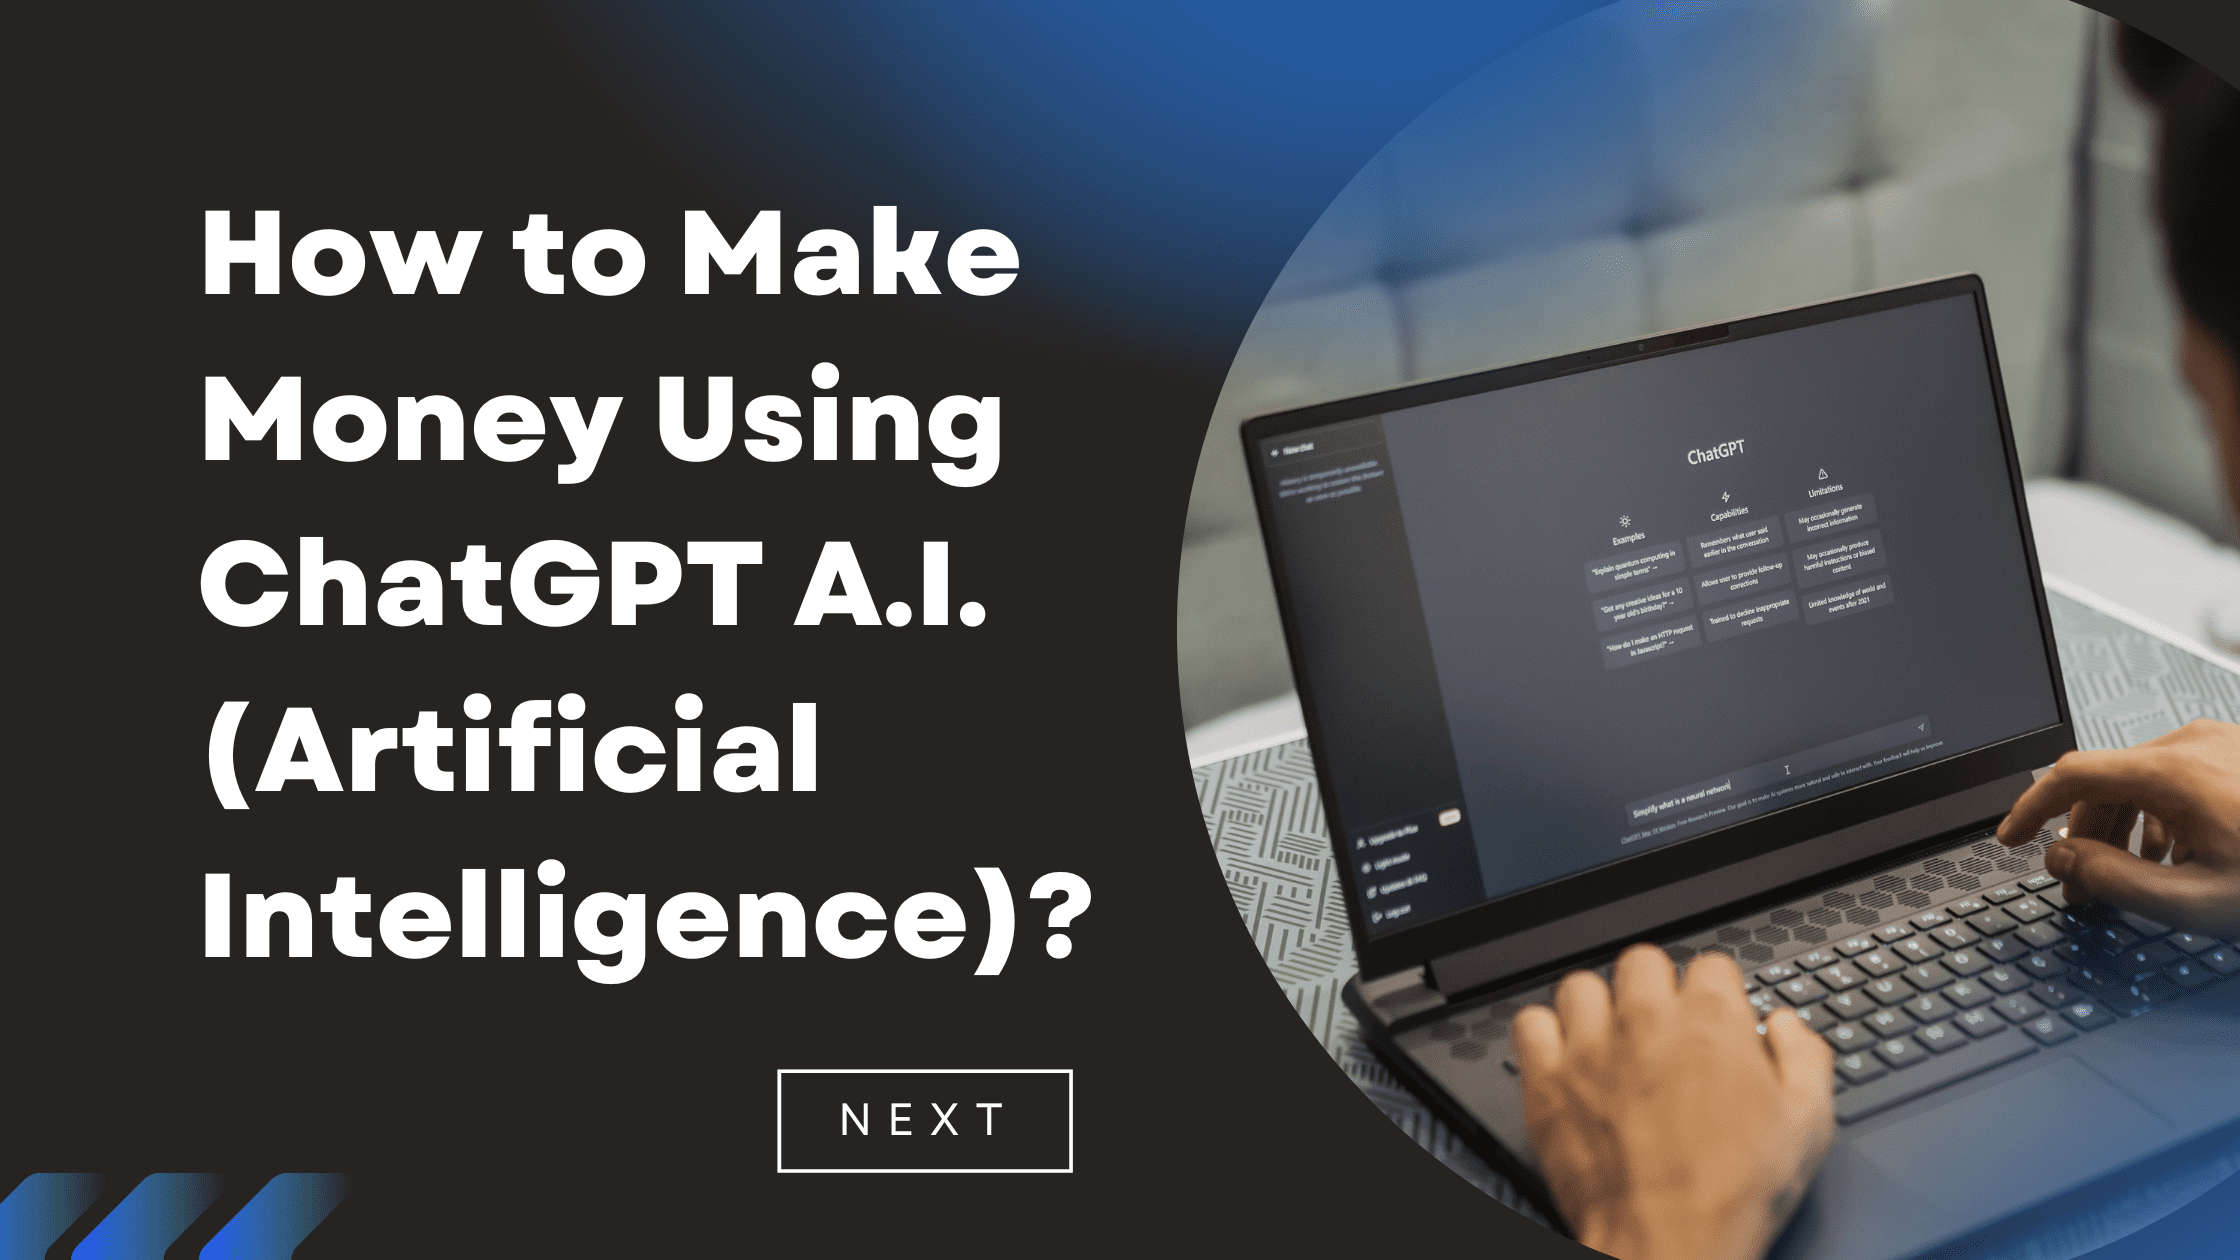 You are currently viewing How to Make Money Using ChatGPT A.I. (Artificial Intelligence)?